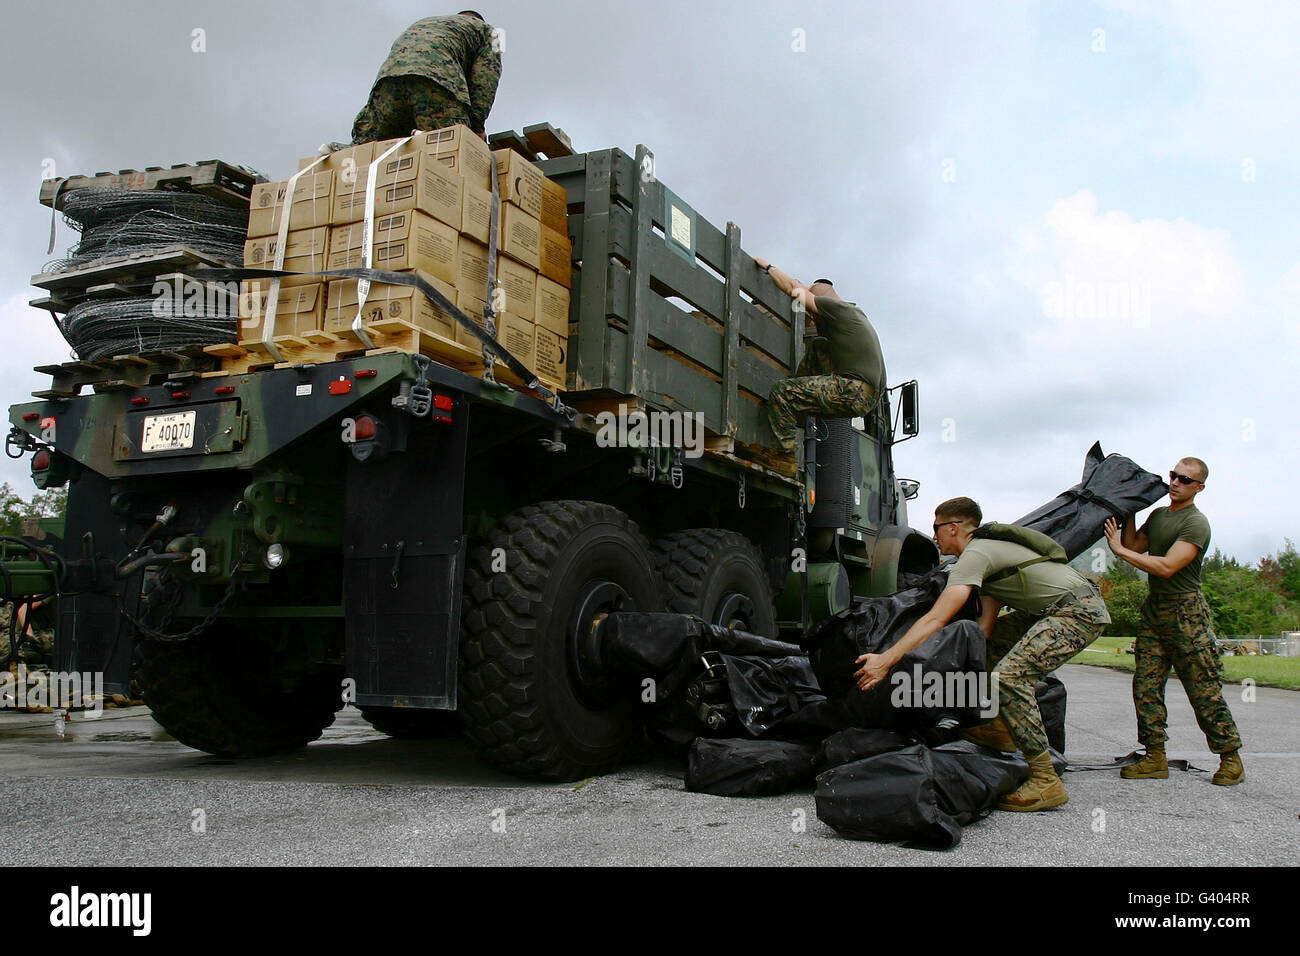 Marines offload tents from a seven-ton truck. Stock Photo